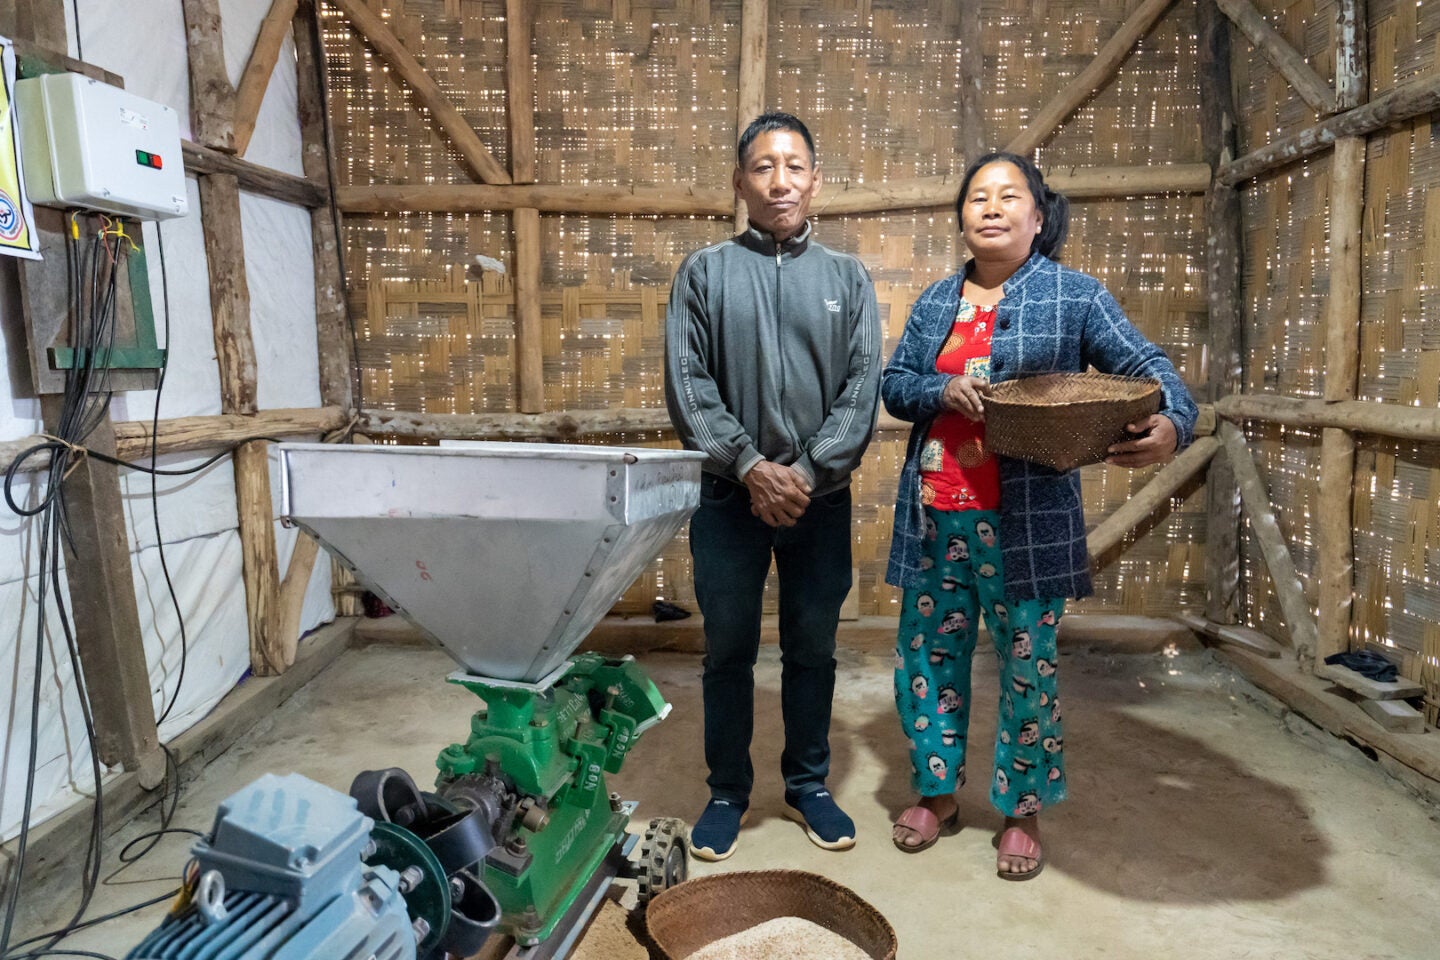 Rice huller and spouse in Nagaland benefitting from solar mini-grids 2022 (Photo Courtesy of SPI)